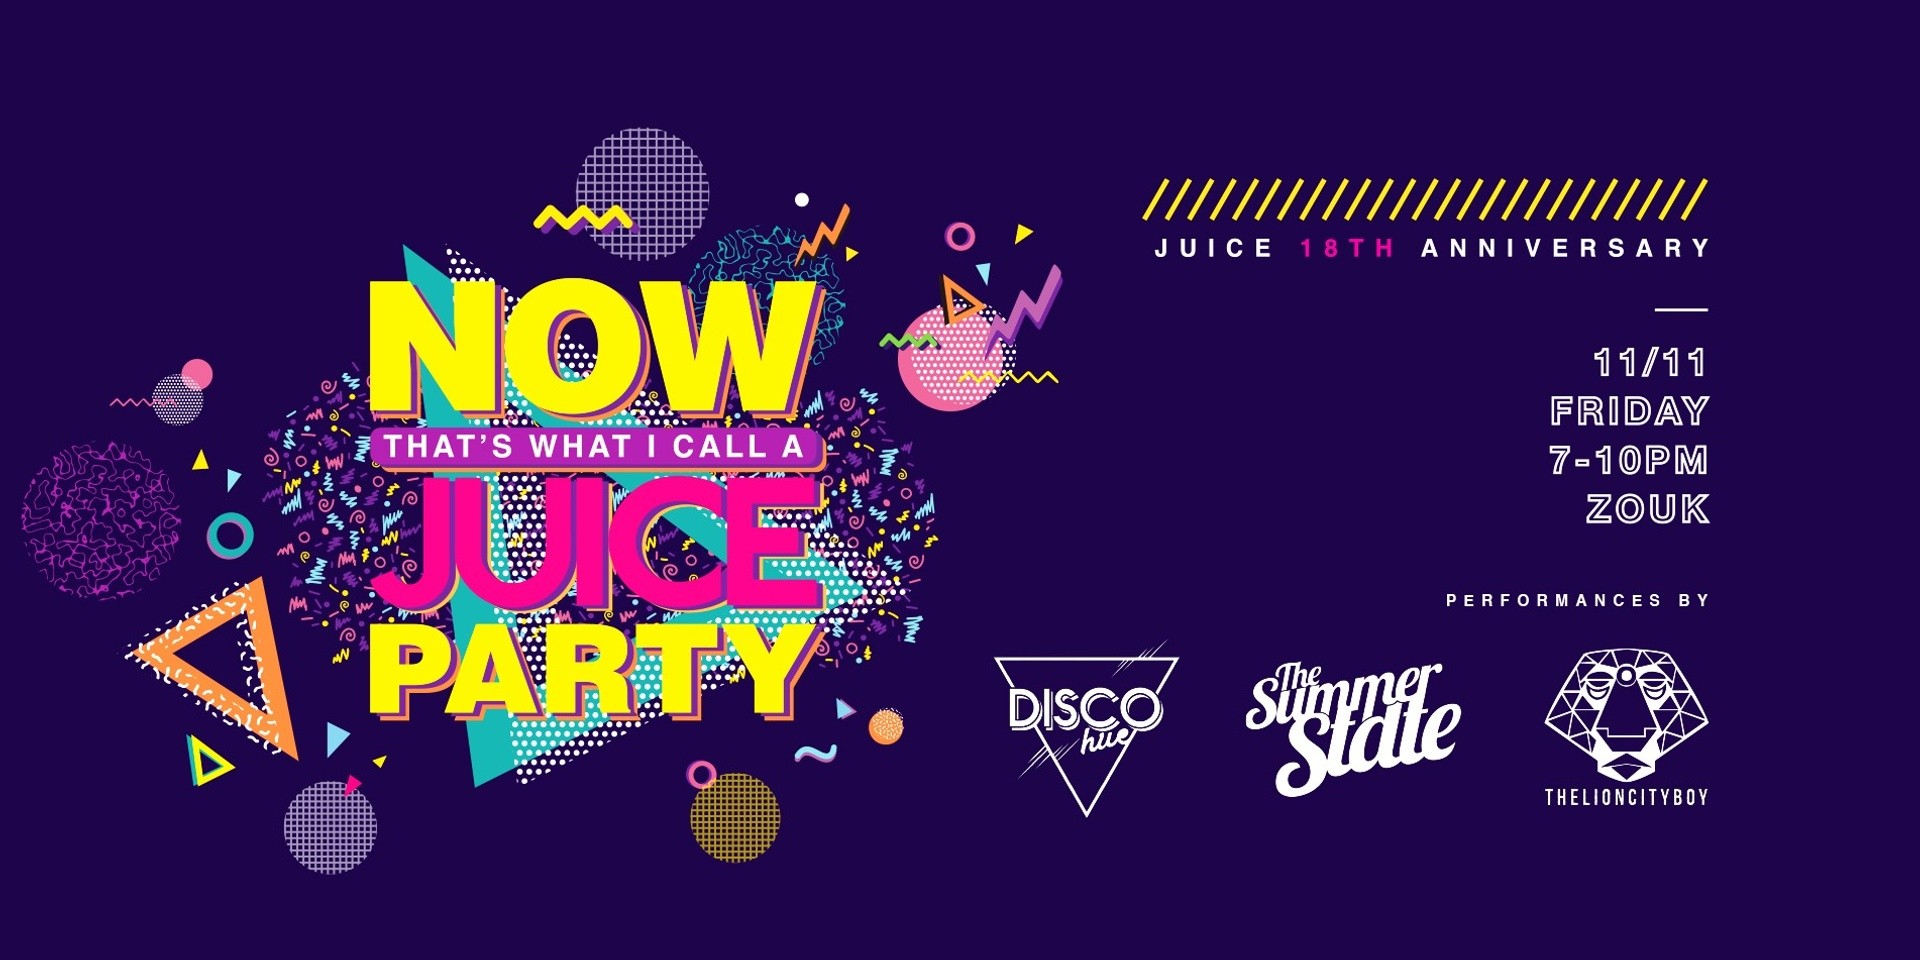 JUICE Singapore throws back to the 90s' for their 18th birthday with The Summer State, Disco Hue & THELIONCITYBOY